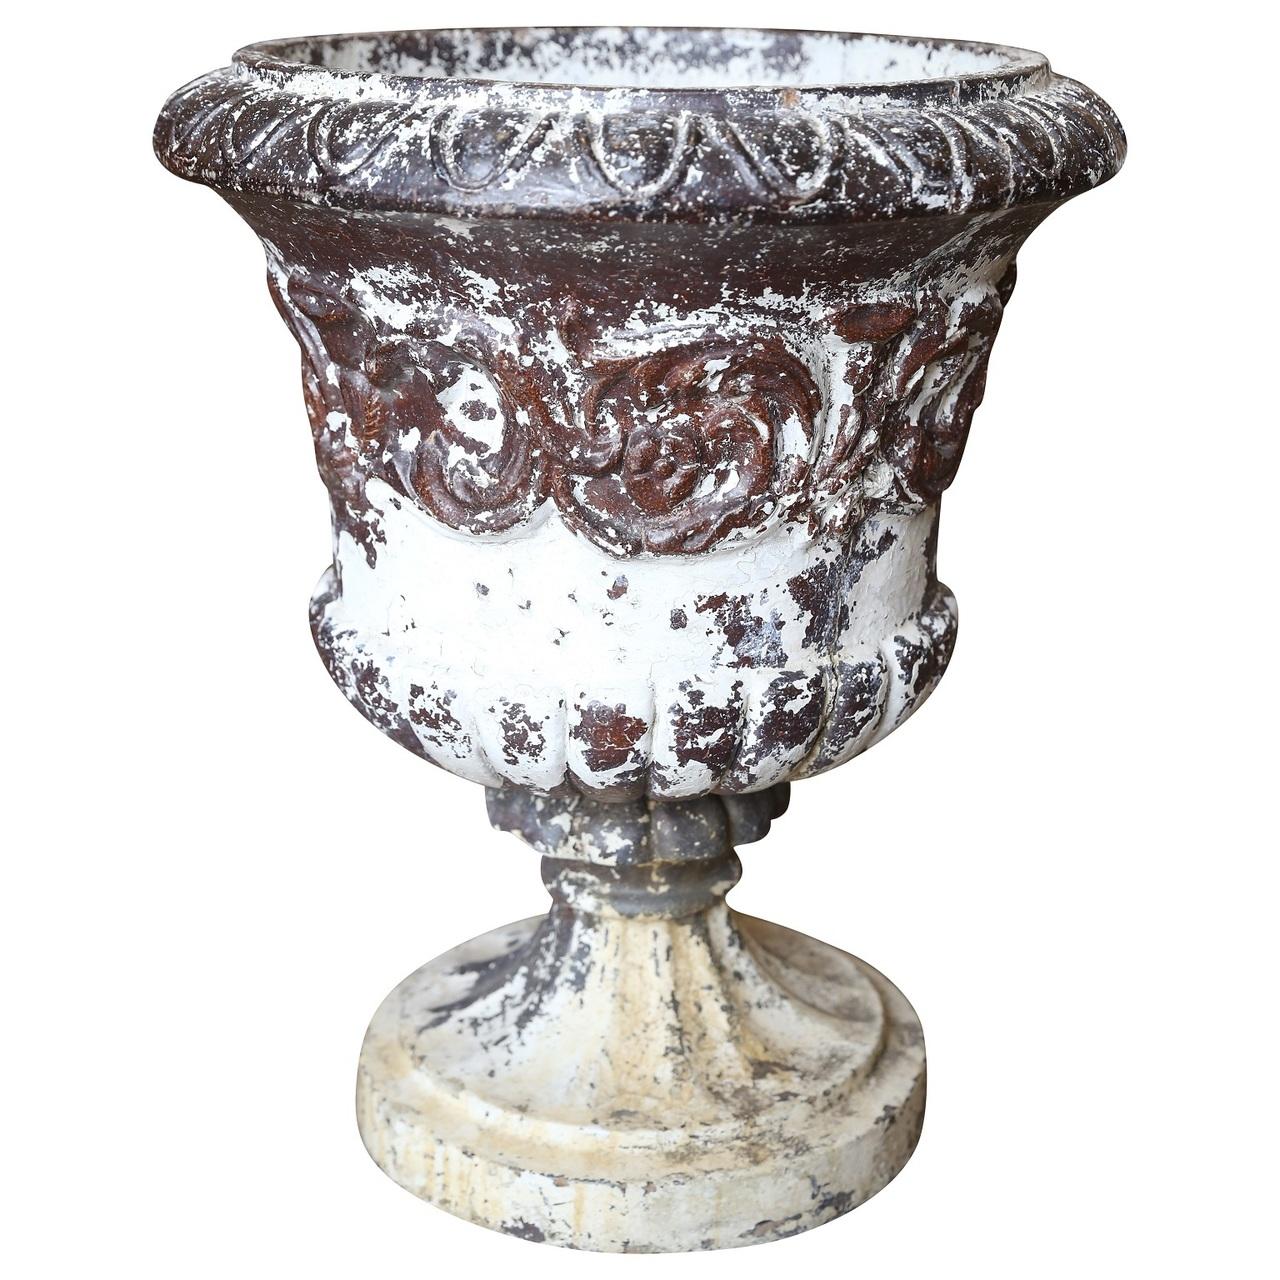 Extremely Decorative Terracotta Urn 1